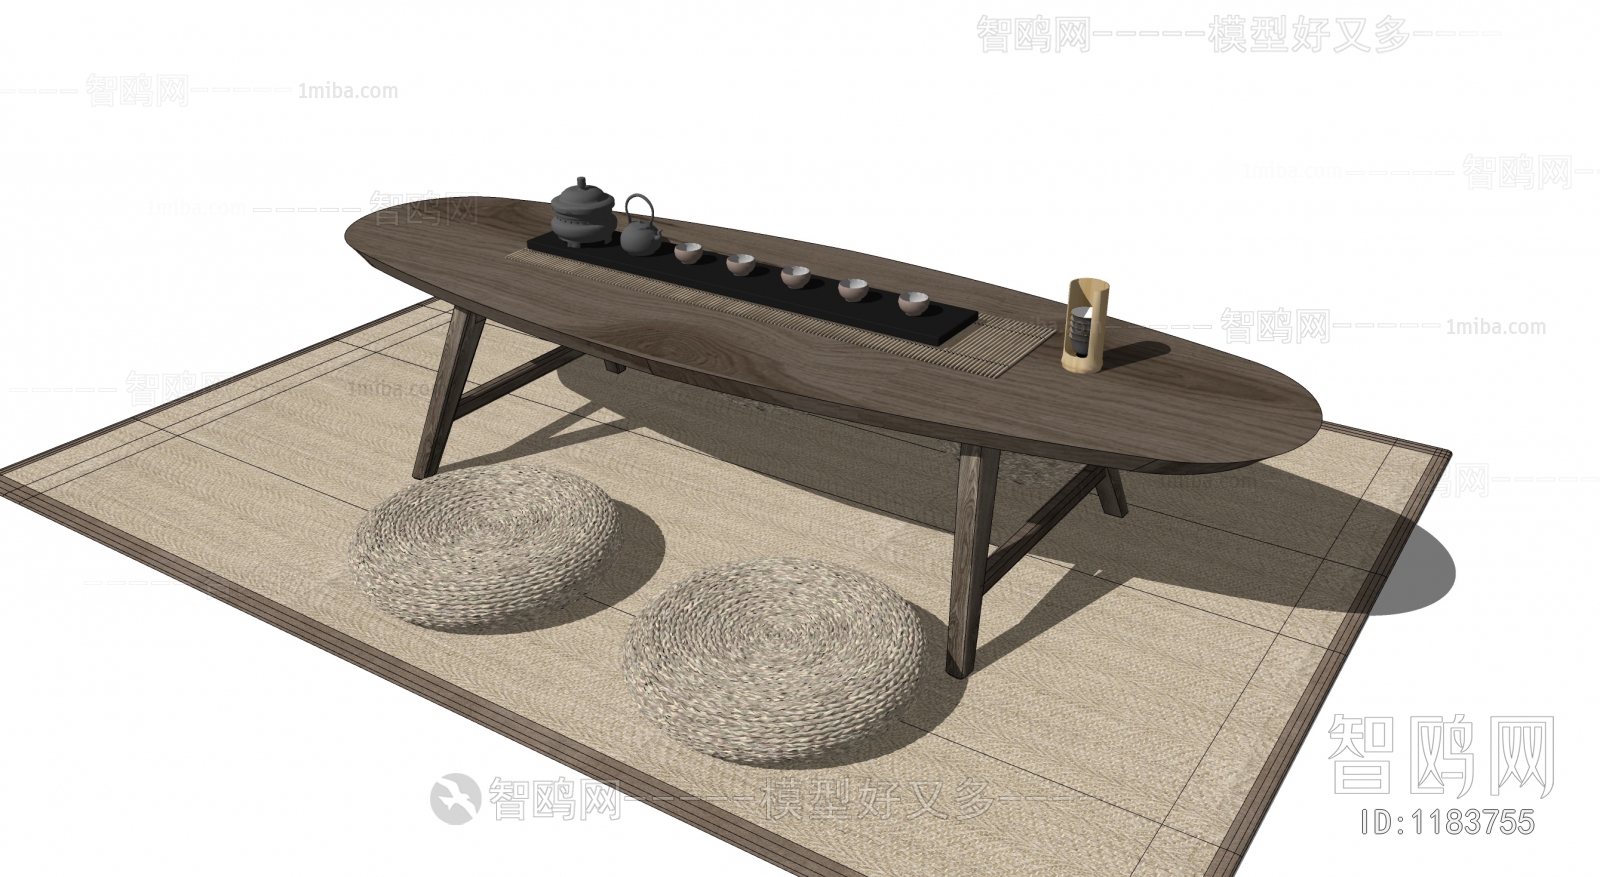 Japanese Style Tea Tables And Chairs